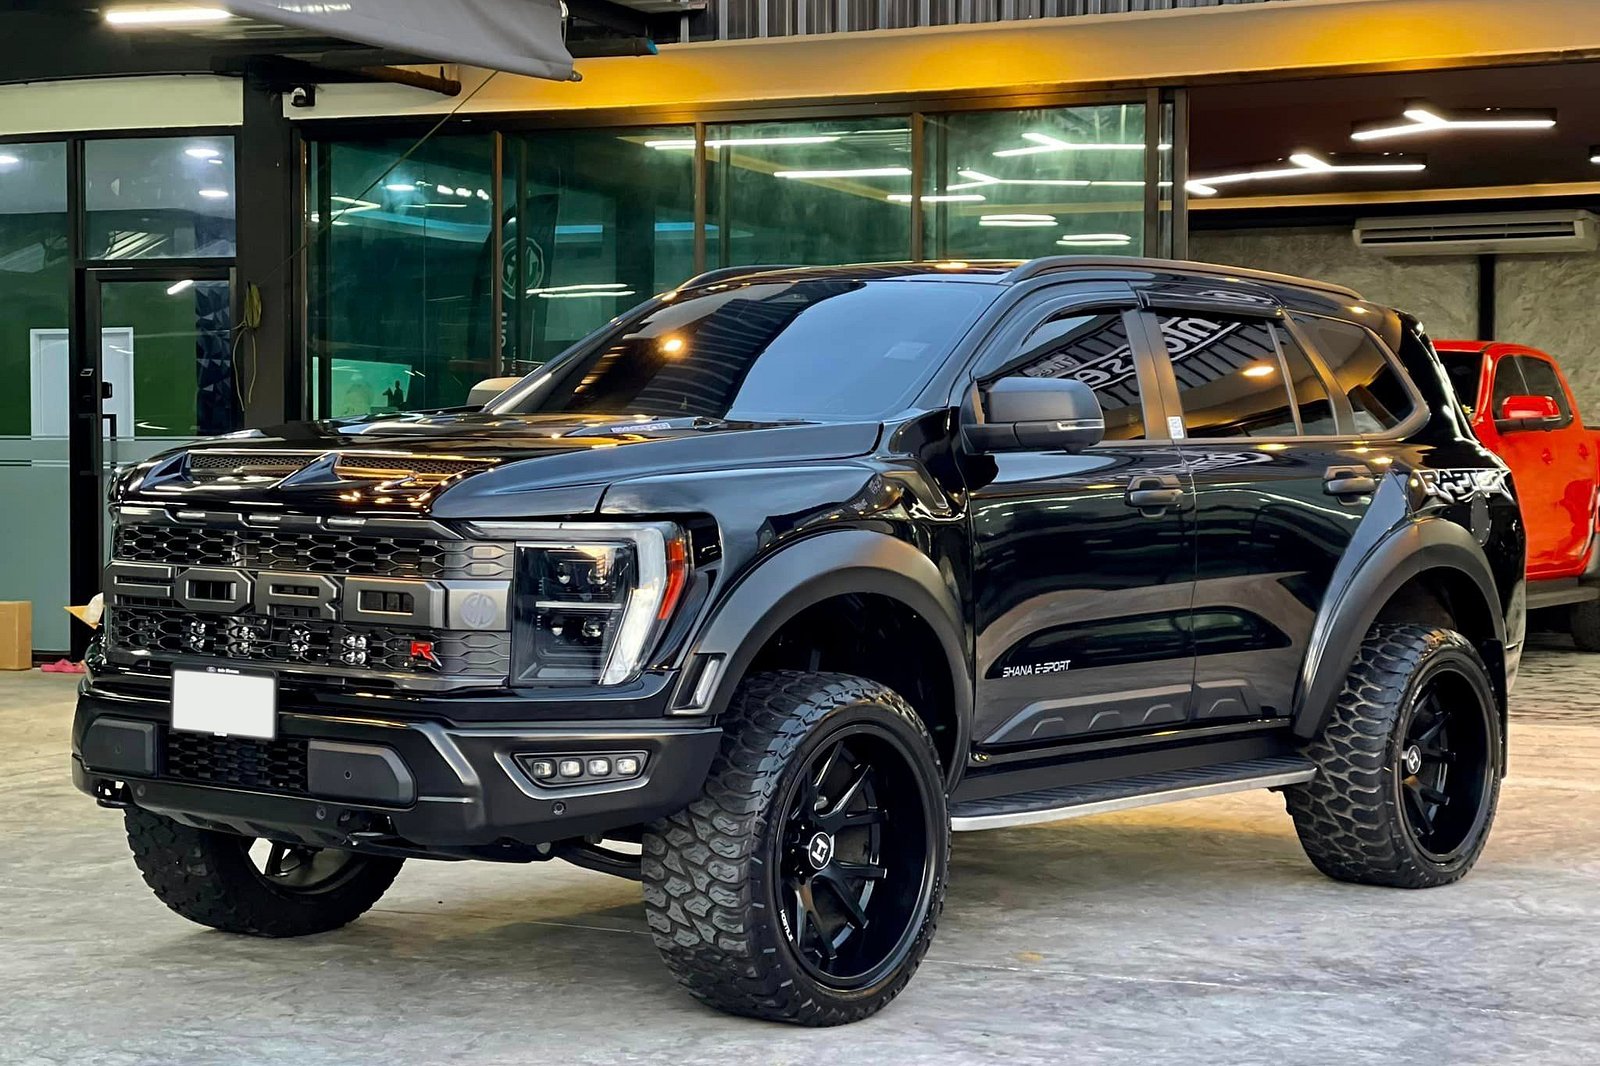 Ford's Humble Everest SUV Gets The Raptor Treatment